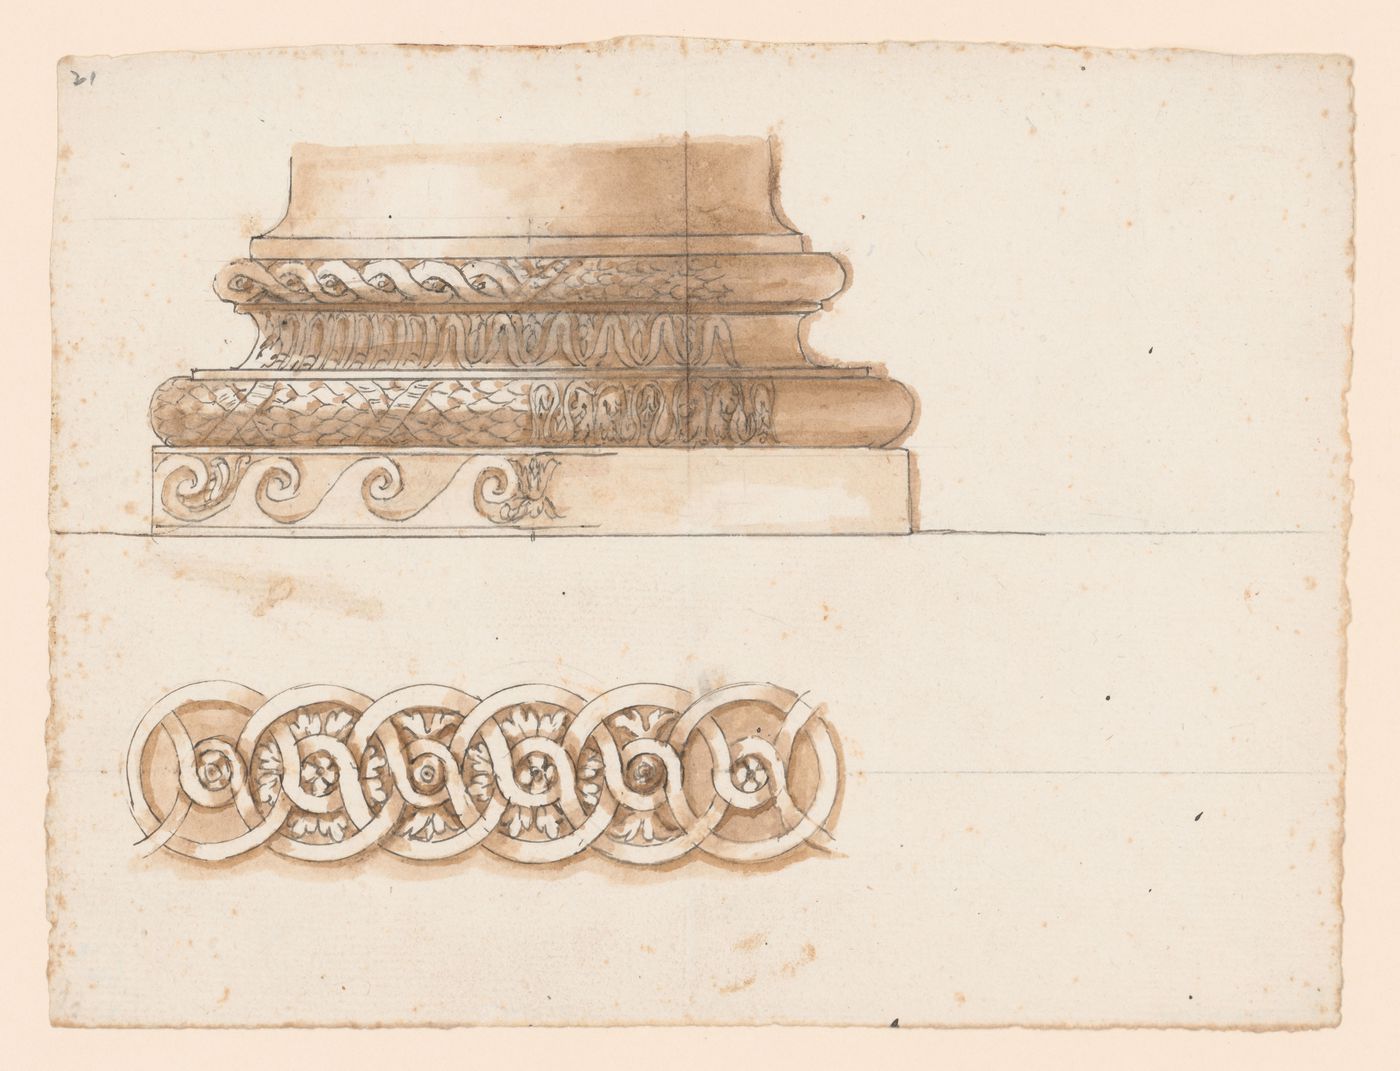 Elevations for the base of a column and for a band of scrollwork